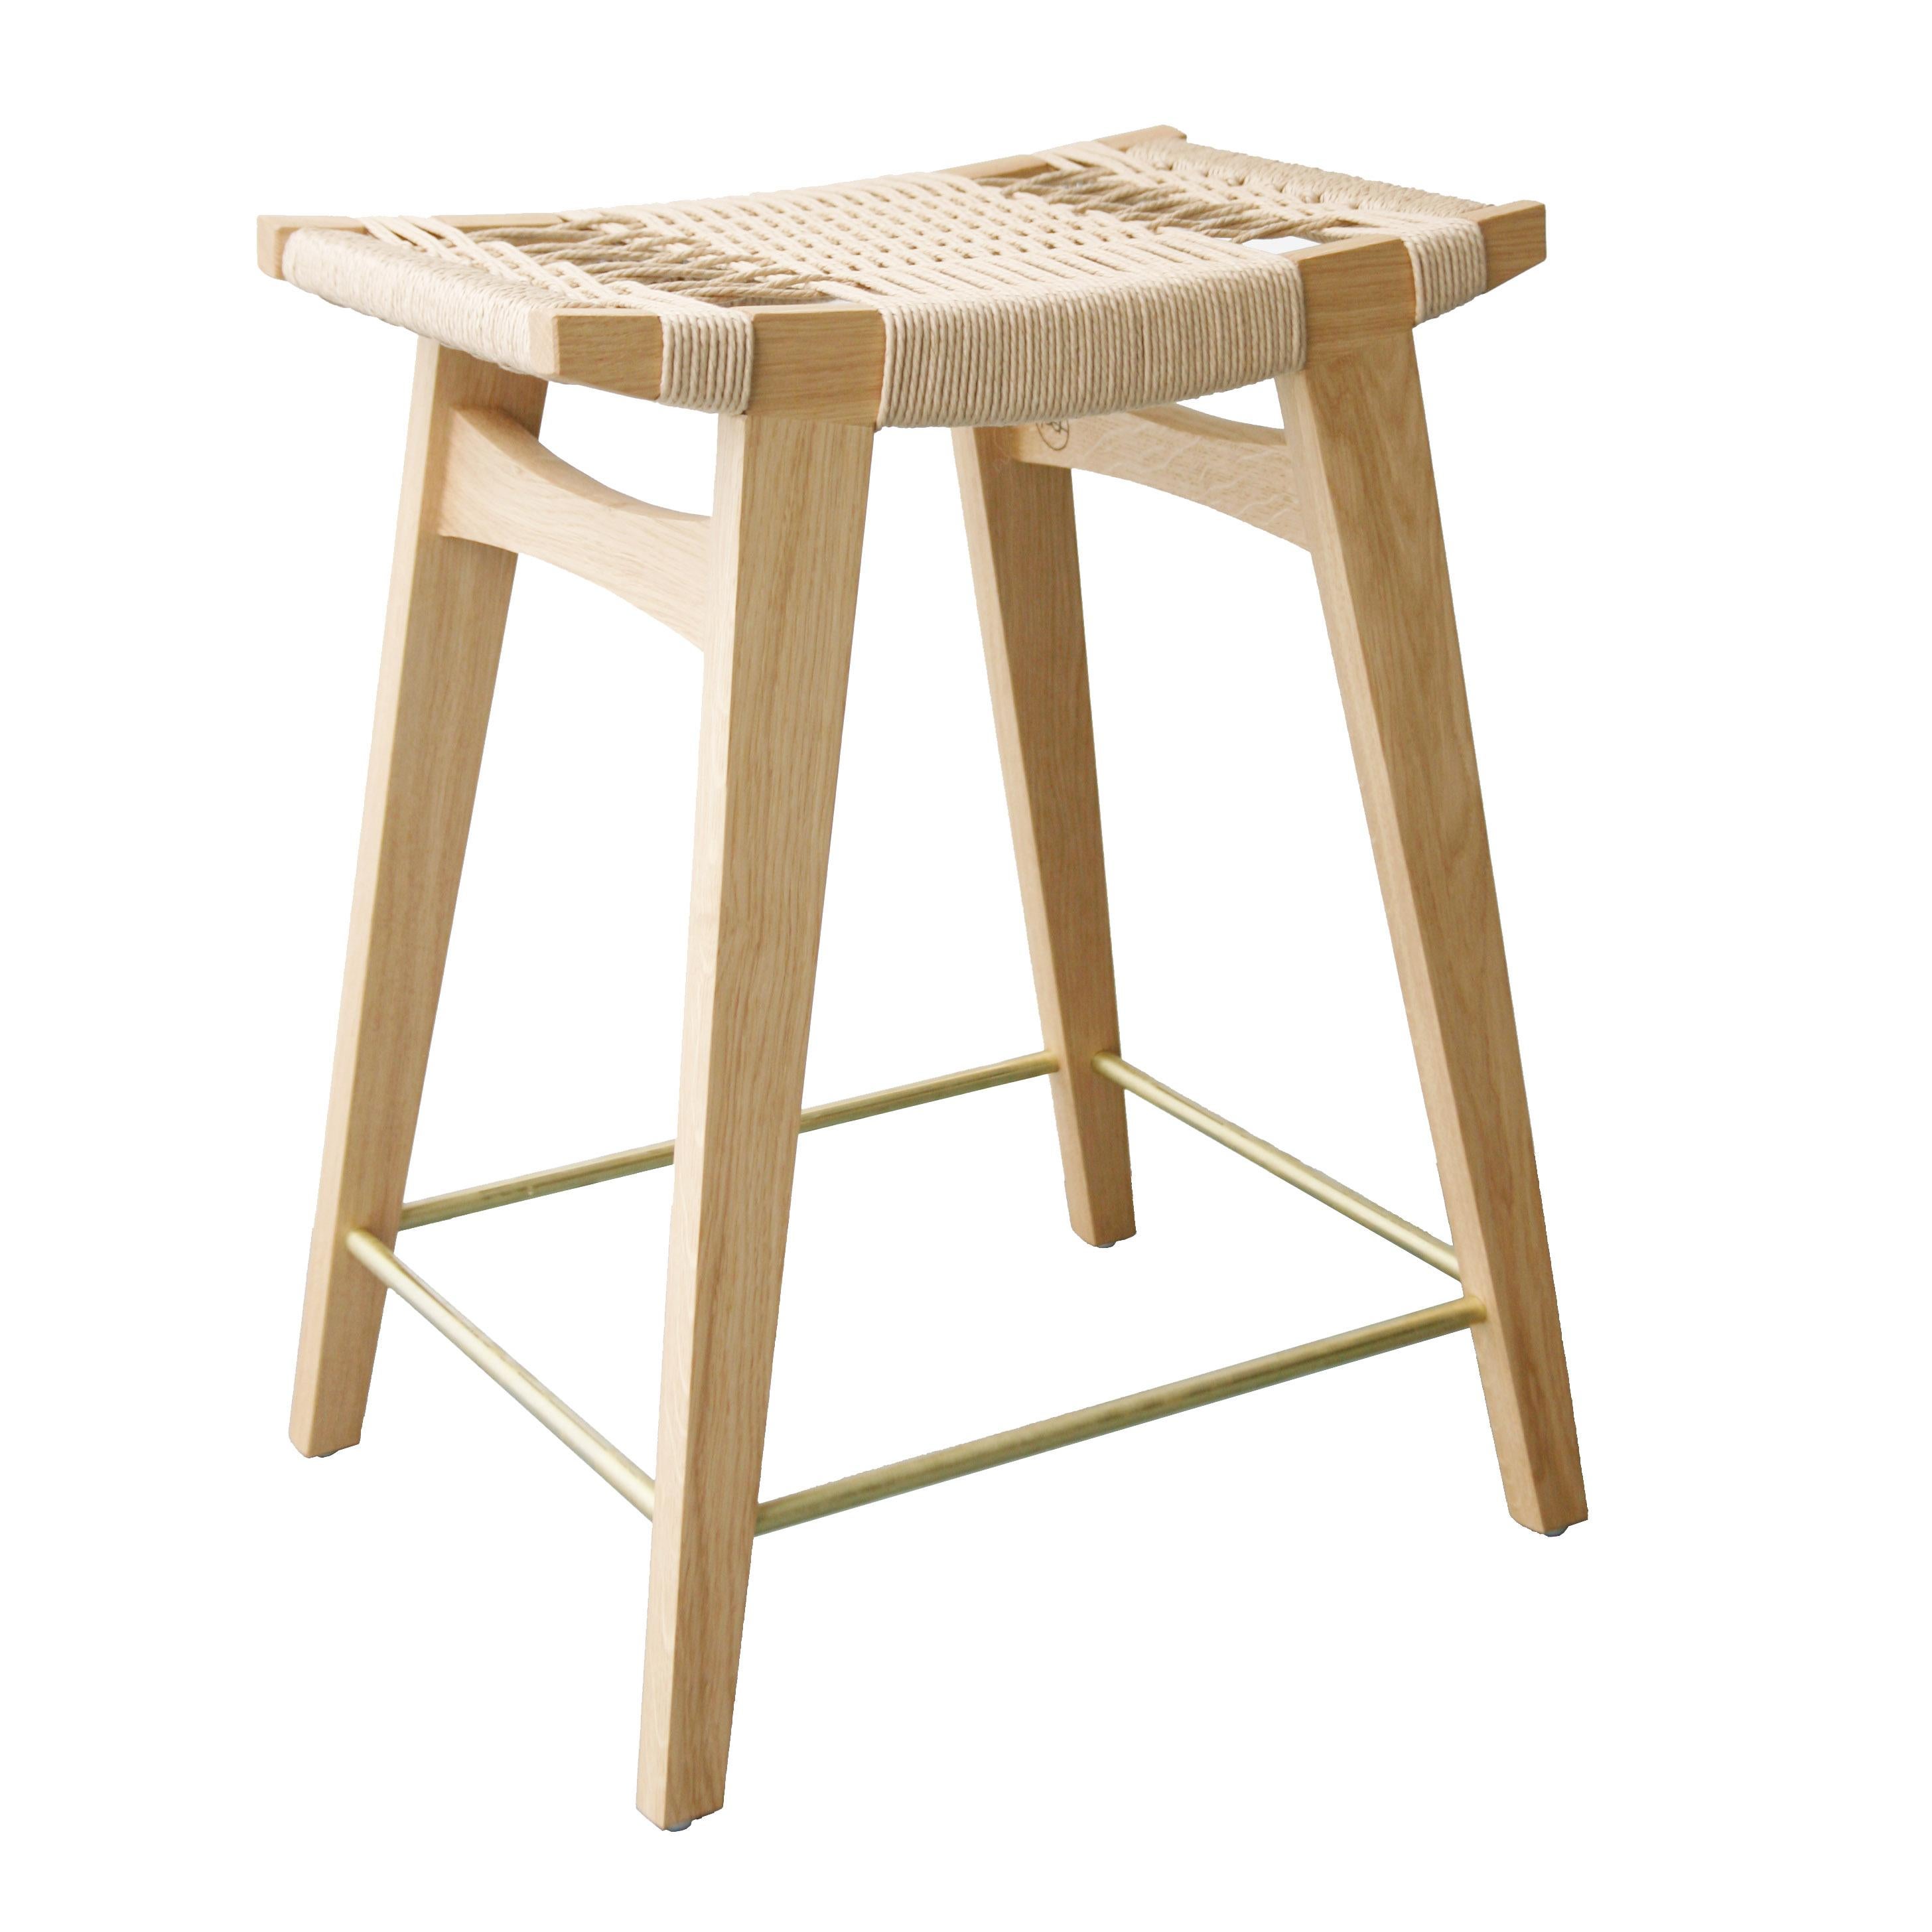 Our low-pi bar stool at 61cm (24